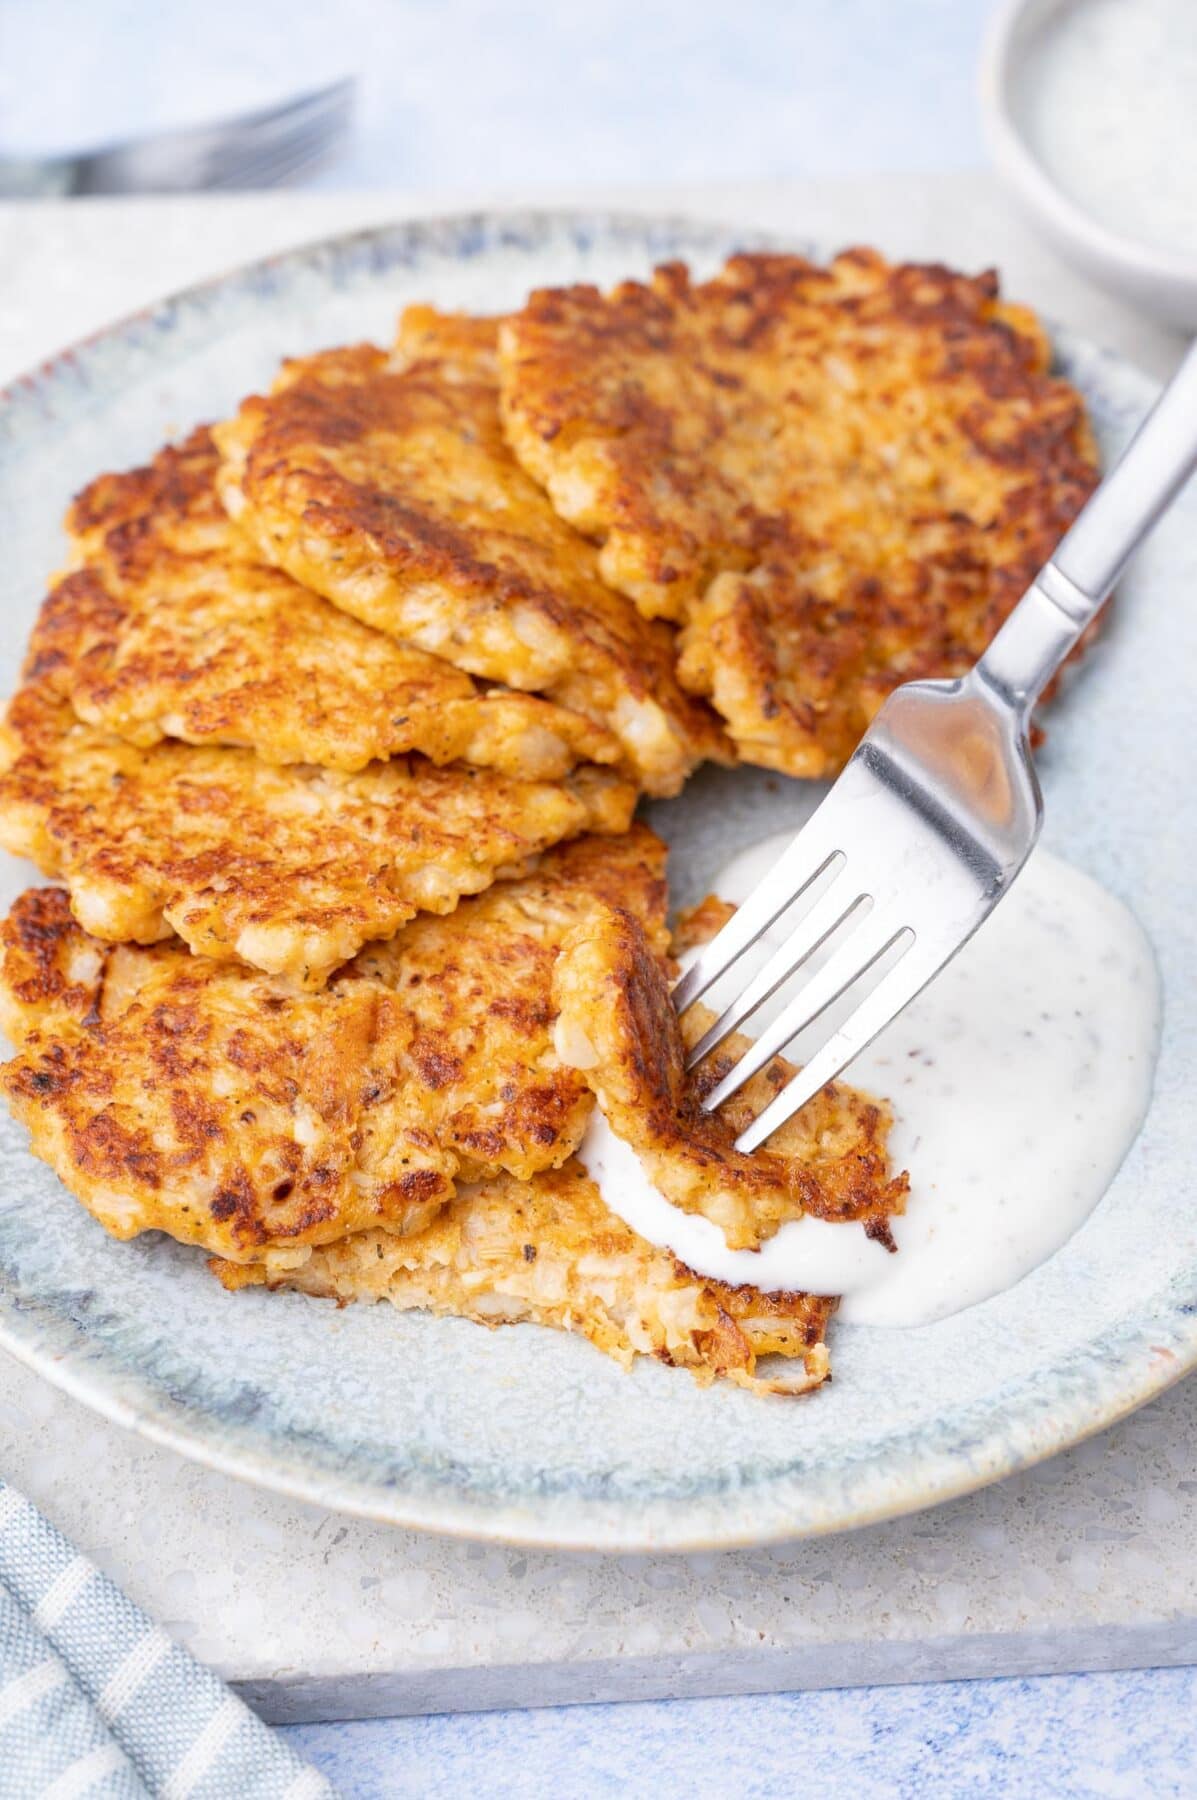 Cauliflower fritters on a blue plate are being dipped into yogurt dip.